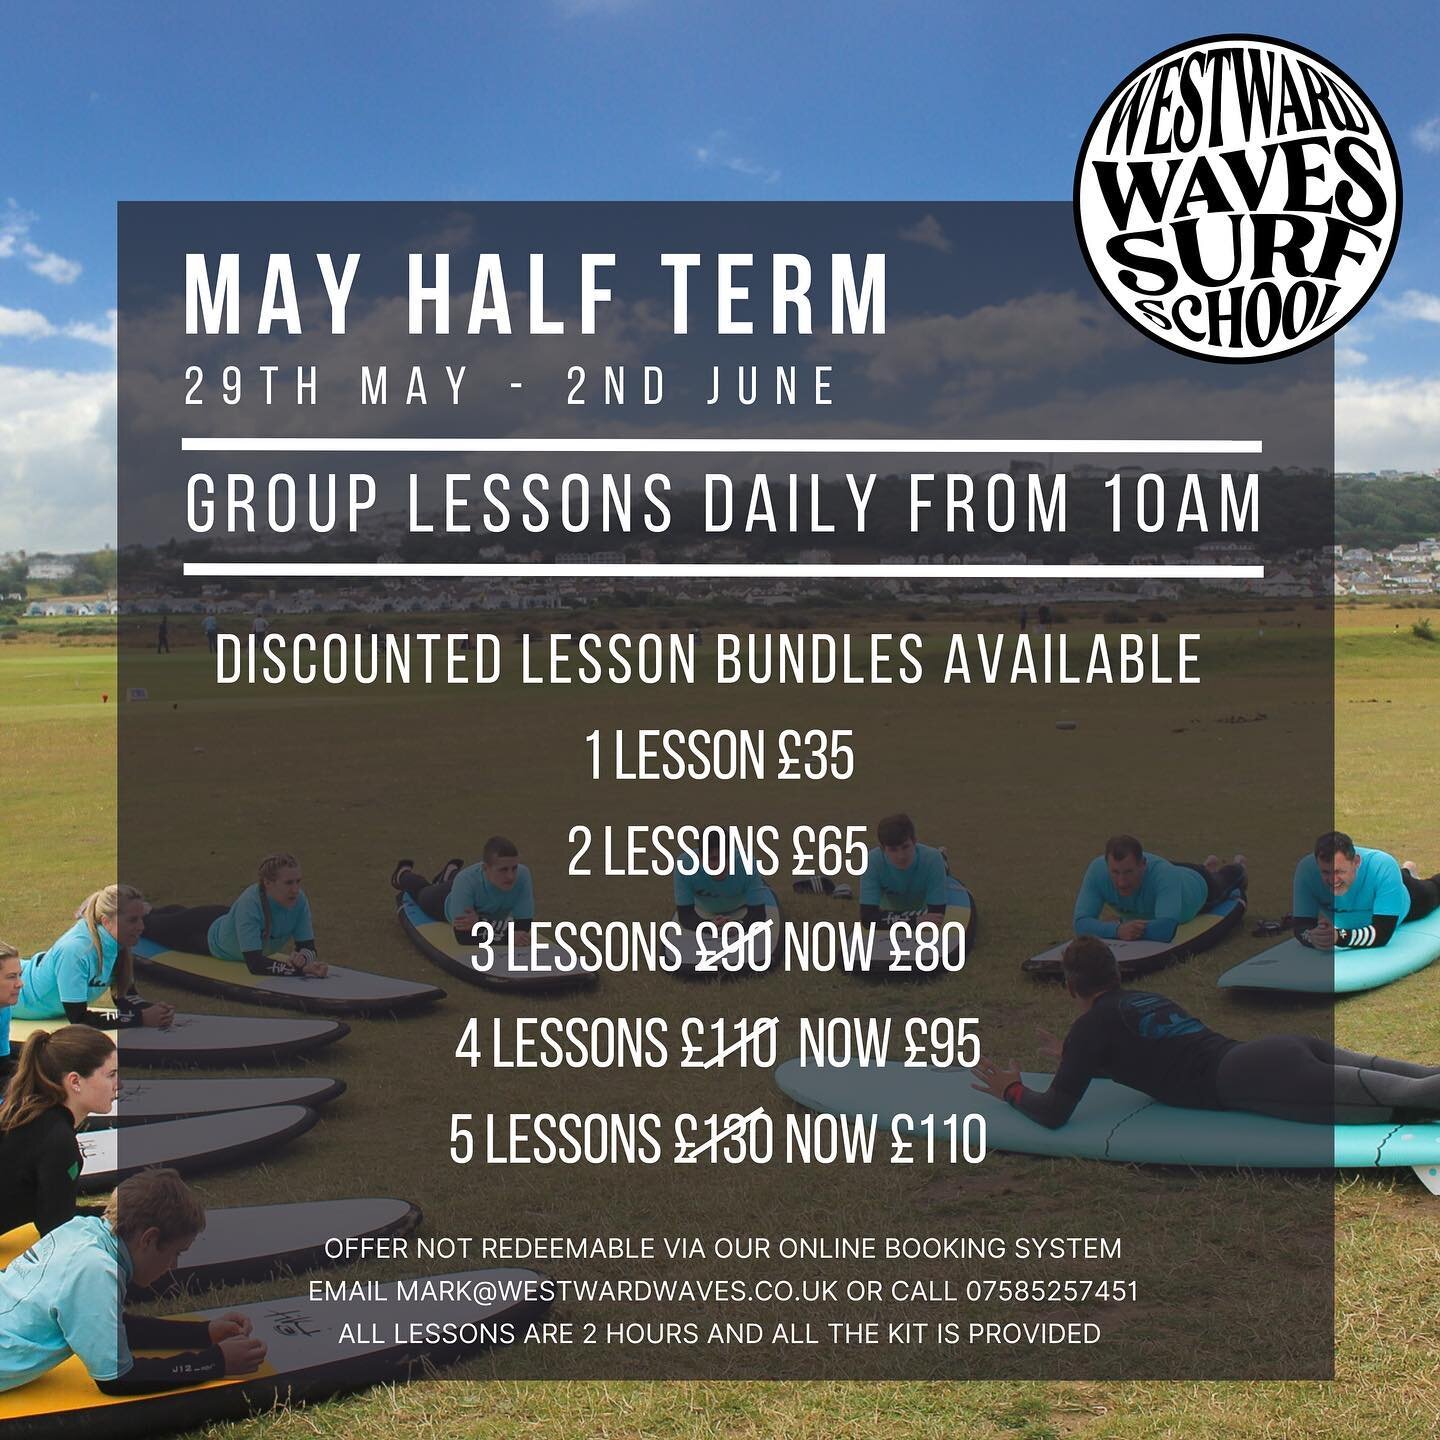 Stuck for ideas for the upcoming May Half Term? Surfing is never a bad idea! Lessons suited to all abilities, why not join us. Learn a new skill before the summer holidays or pick up from where you left off last time. Our instructors are some of the 